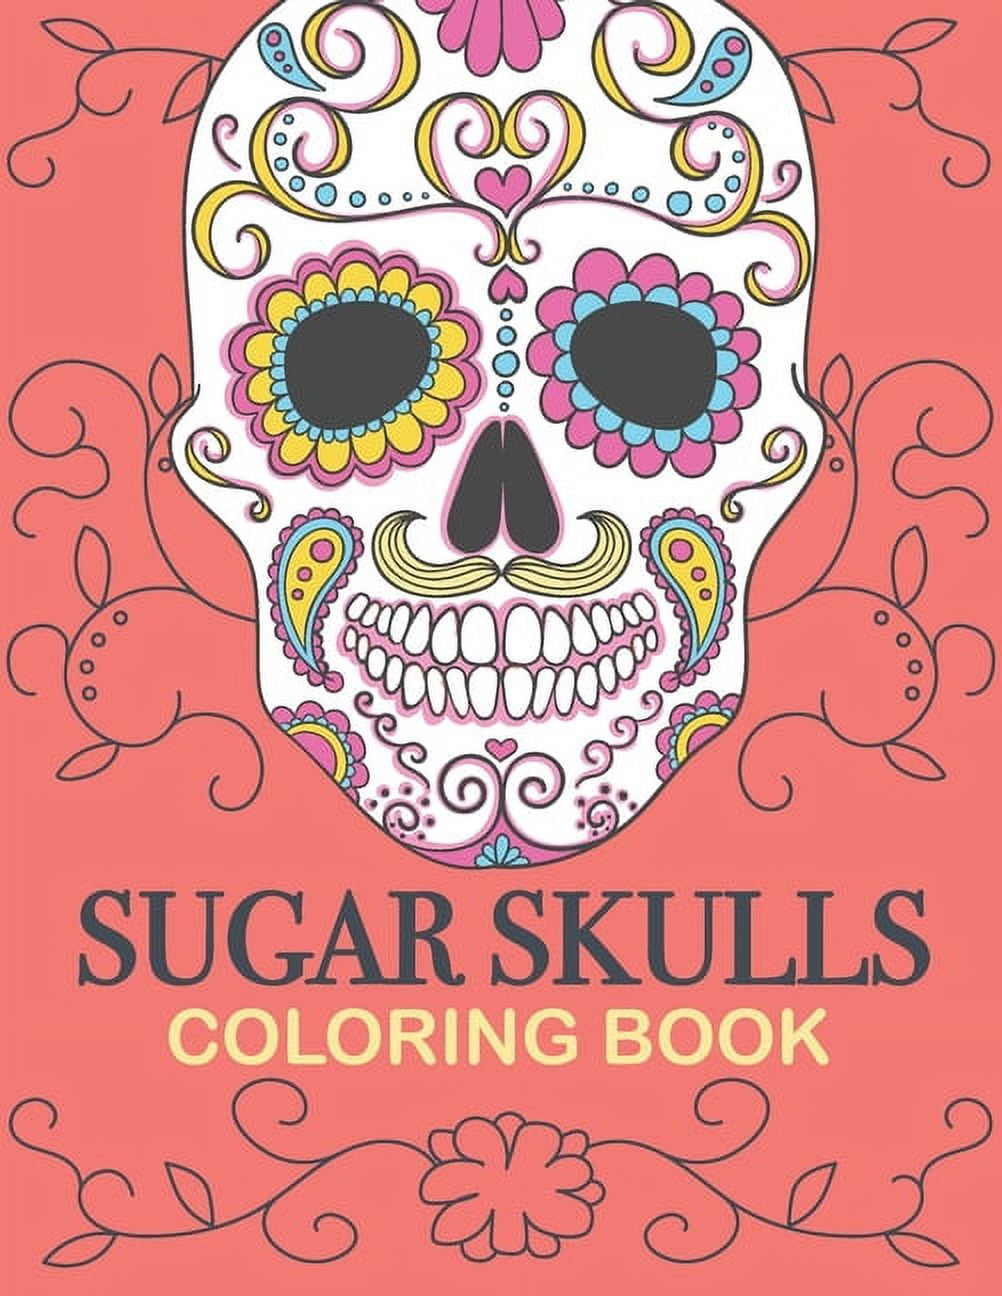 Sugar skulls coloring book a dia de los muertos day of the dead coloring book for adults with fun skull designs easy patterns for grownups teens paperback